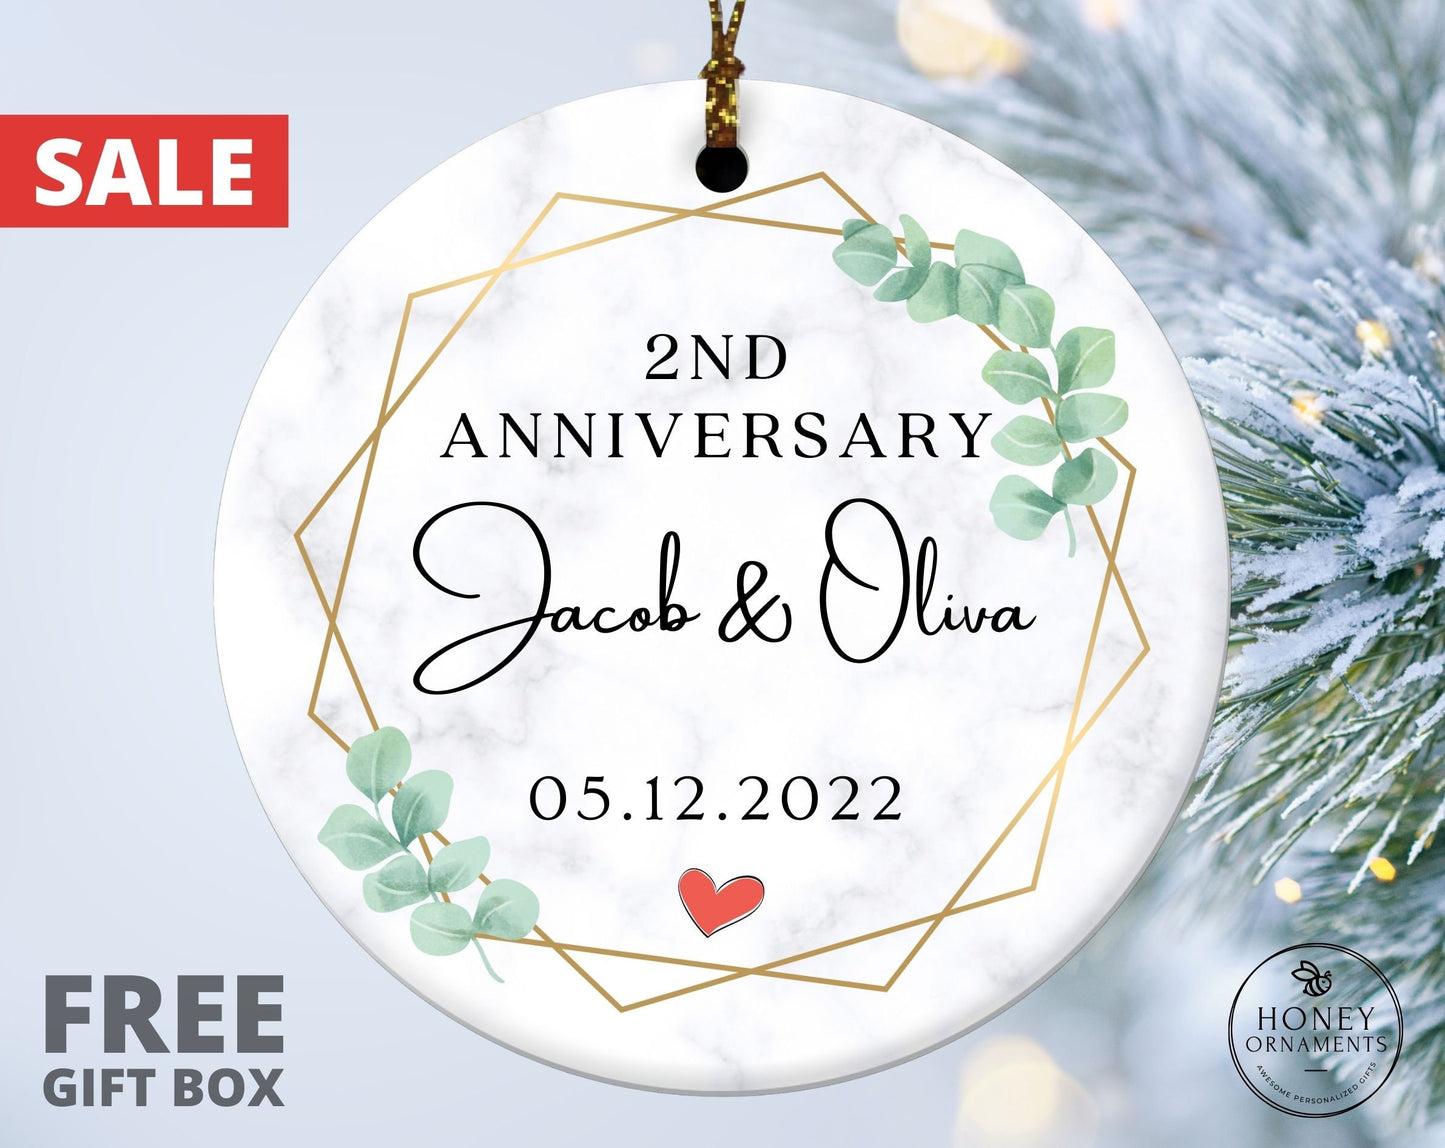 Cotton Anniversary Gift for Him, 2nd Anniversary Gift, Personalized Anniversary Ornament, Cotton Anniversary Gift for Her, 2 Year Wedding